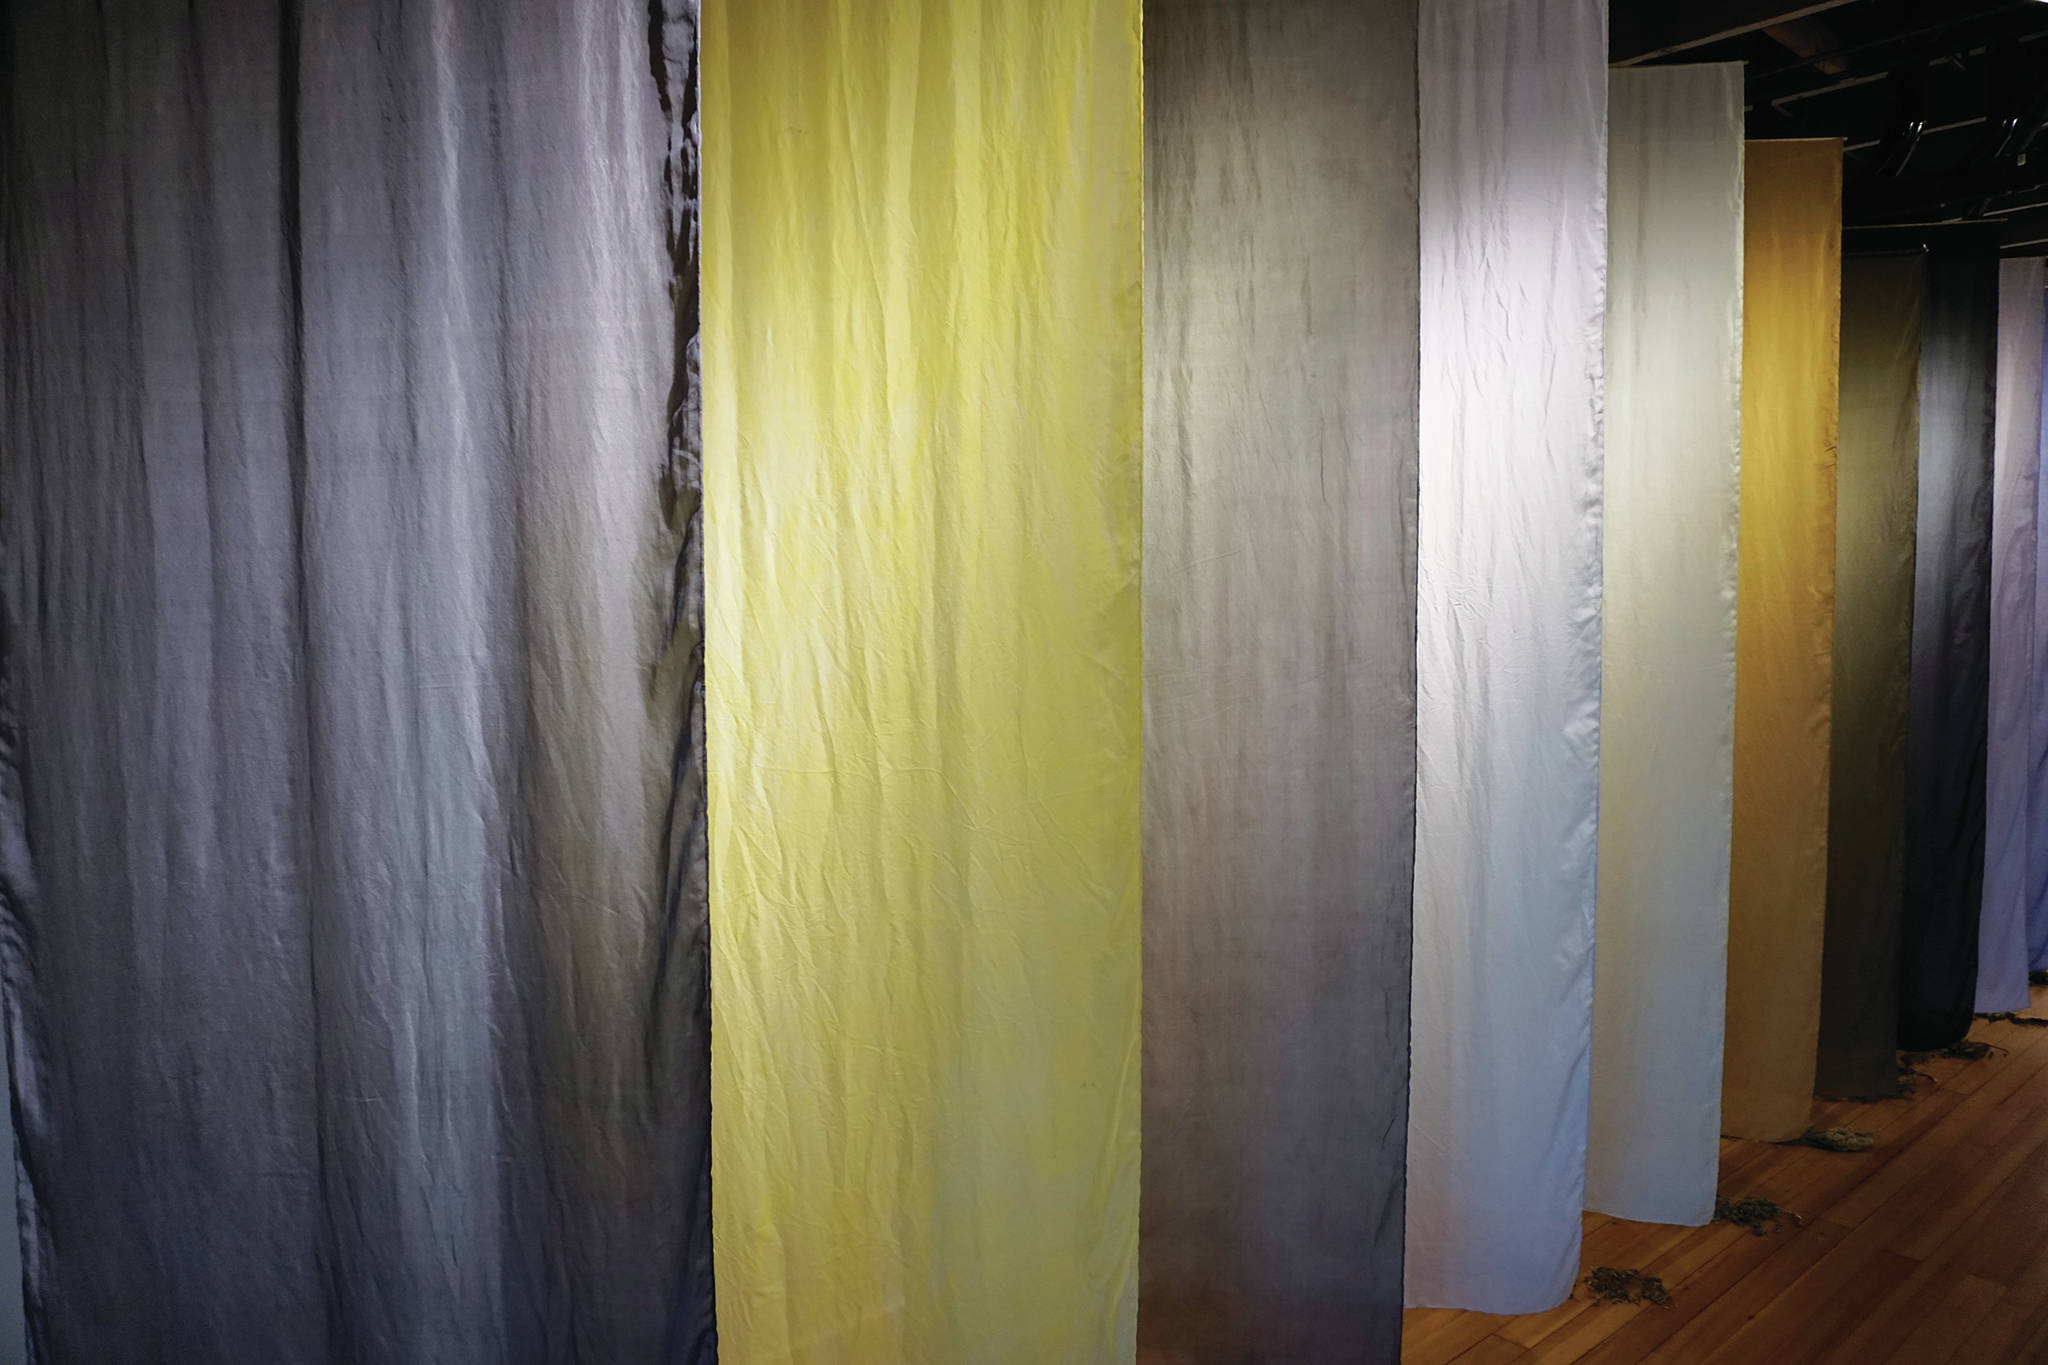 A row of dyed silk wall hangings shows how common Alaska plants found on the lower Kenai Peninsula can be used to make organic dyes, as seen here Tuesday. The hangings are included in Elissa Pettibone’s exhibit, “Swatches,” showing at Bunnell Street Arts Center in Homer.
Michael Armstrong / Homer News